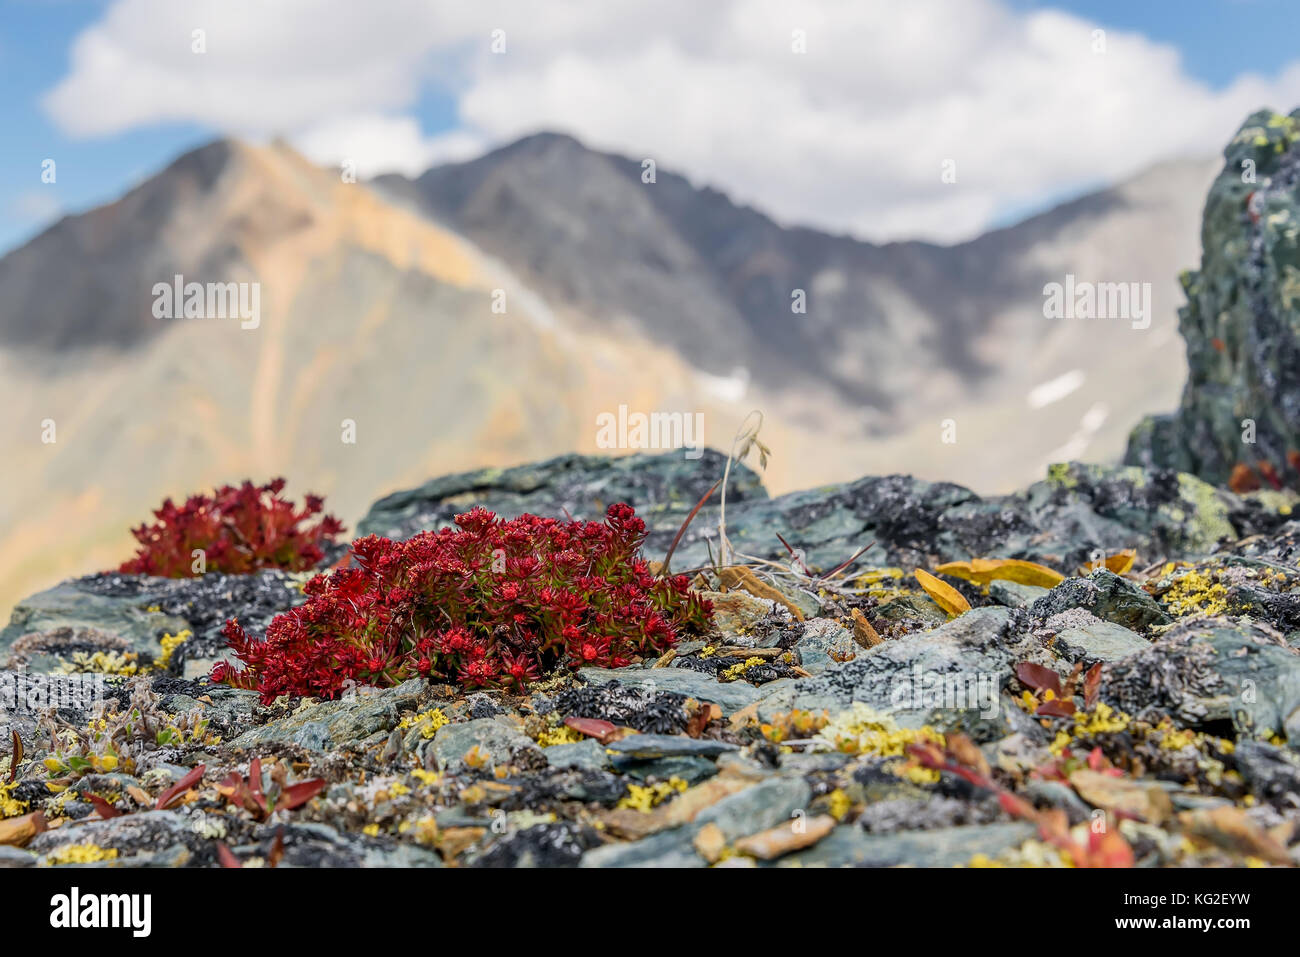 Beautiful floral background with red exotic flowers Rhodiola quadrifida closeup on the rocks on the background of blue sky and clouds in the mountains Stock Photo